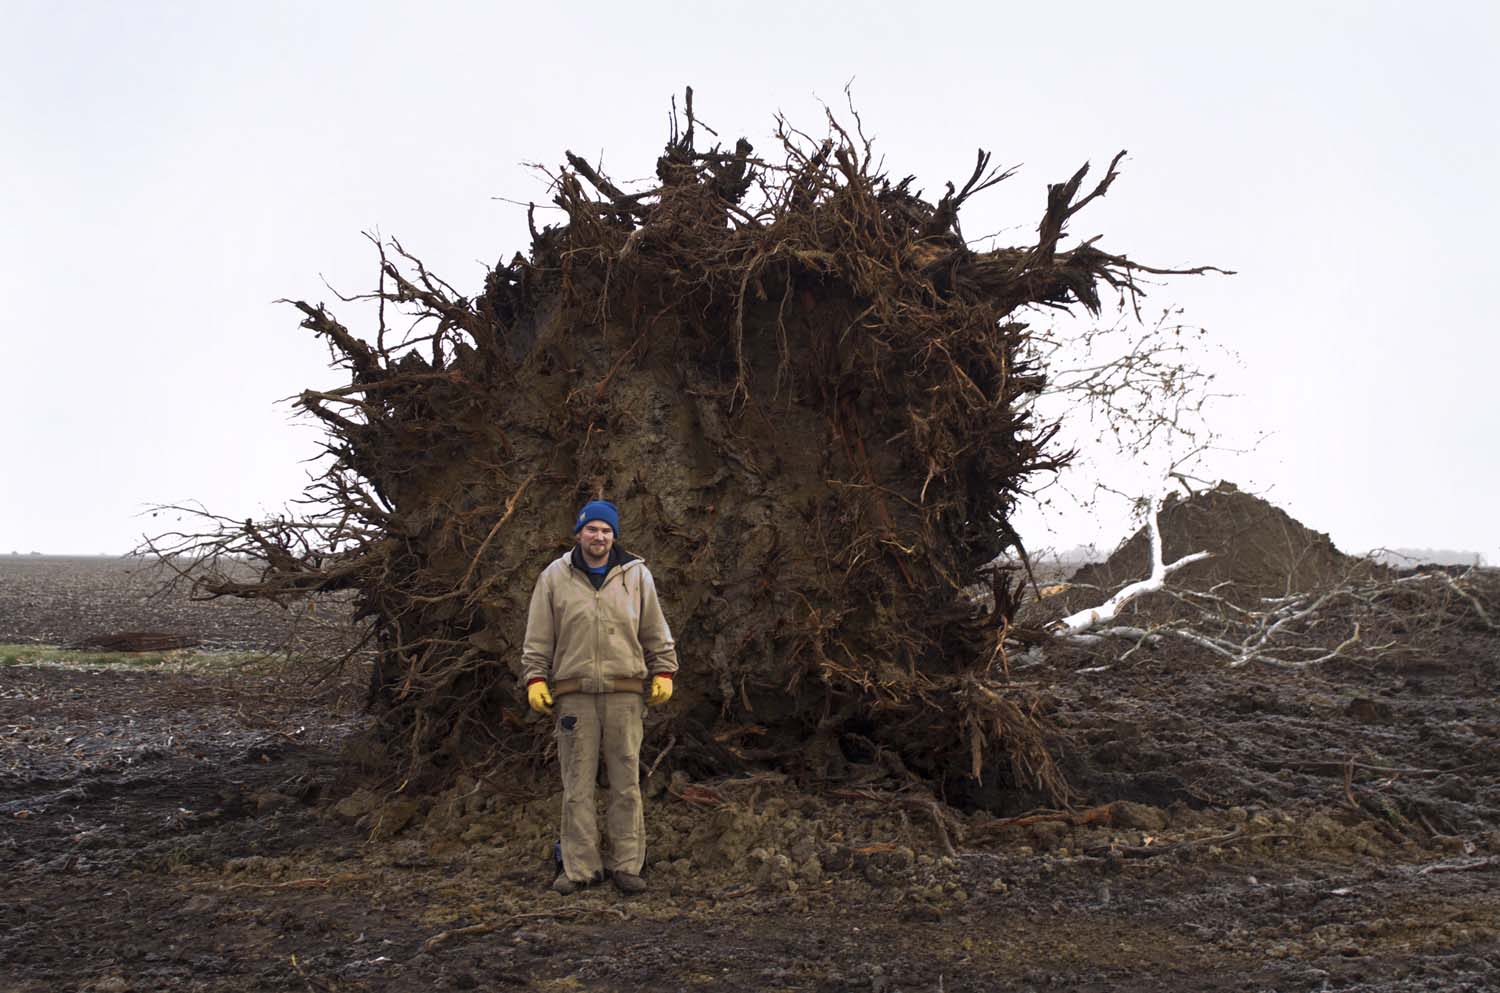  Mike Flesner, in front a tree stump on land where the Morton Seed Company drying barn used to stand. It took him two full days to remove the stump. It was cheaper to knock the building down and clear the land than pay taxes on property. Adams County